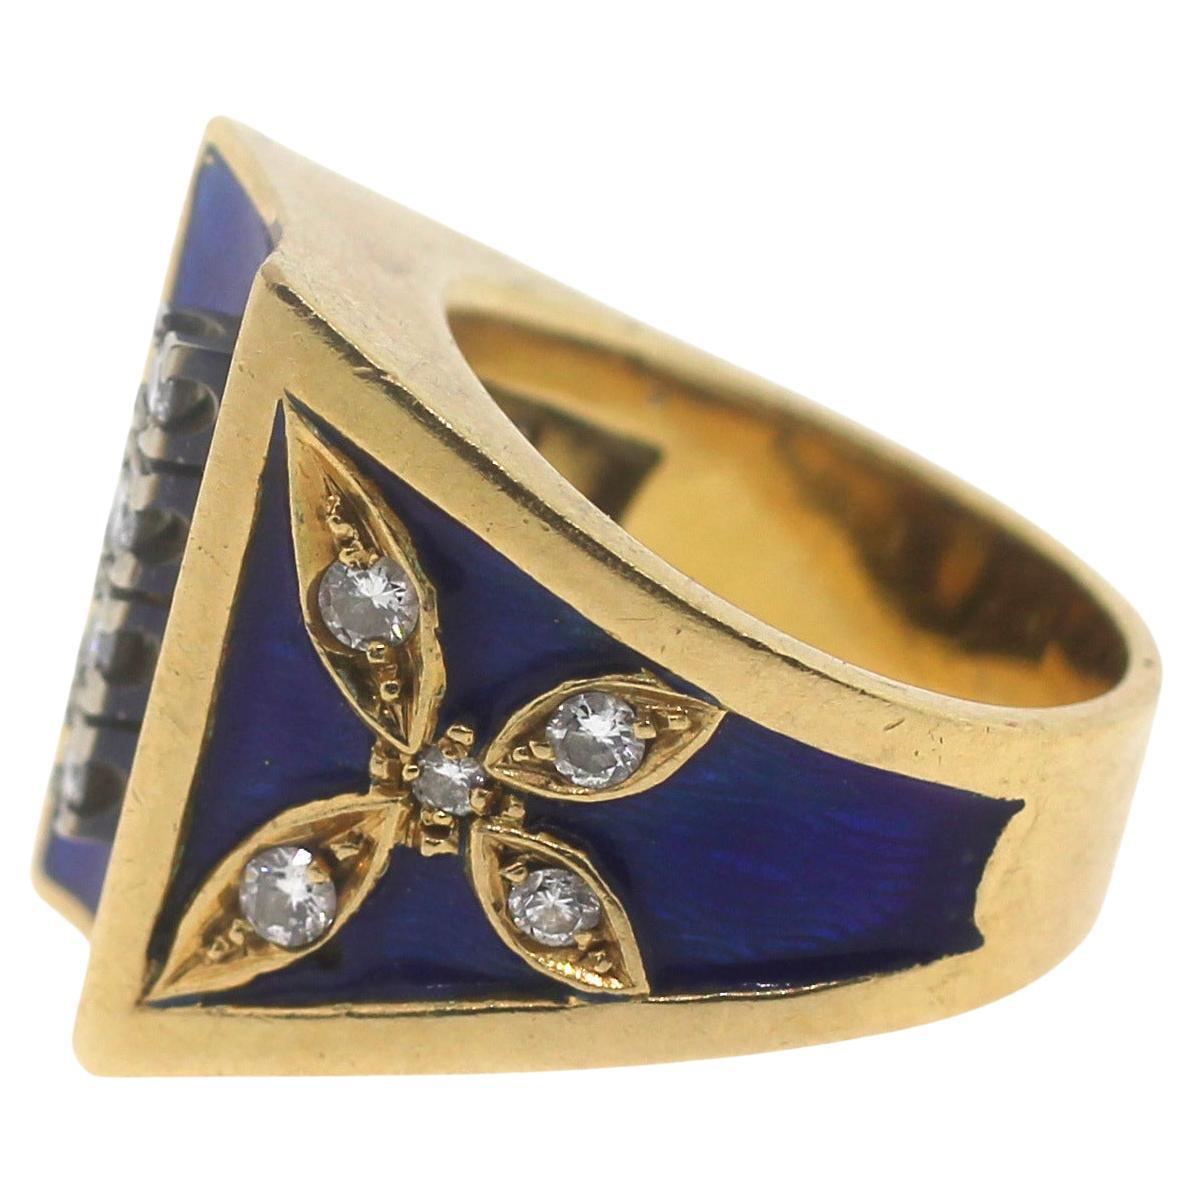 Jewel Of Ocean Estate Cocktail Enamel Ring
18K Yellow Gold & Enamel and Approx. 0.5 Carats Near Colorless VS1 Diamonds
Ring Size: 4.25
Retail Price $15,000.00
Total Item Weight (g): 11.3
Item #